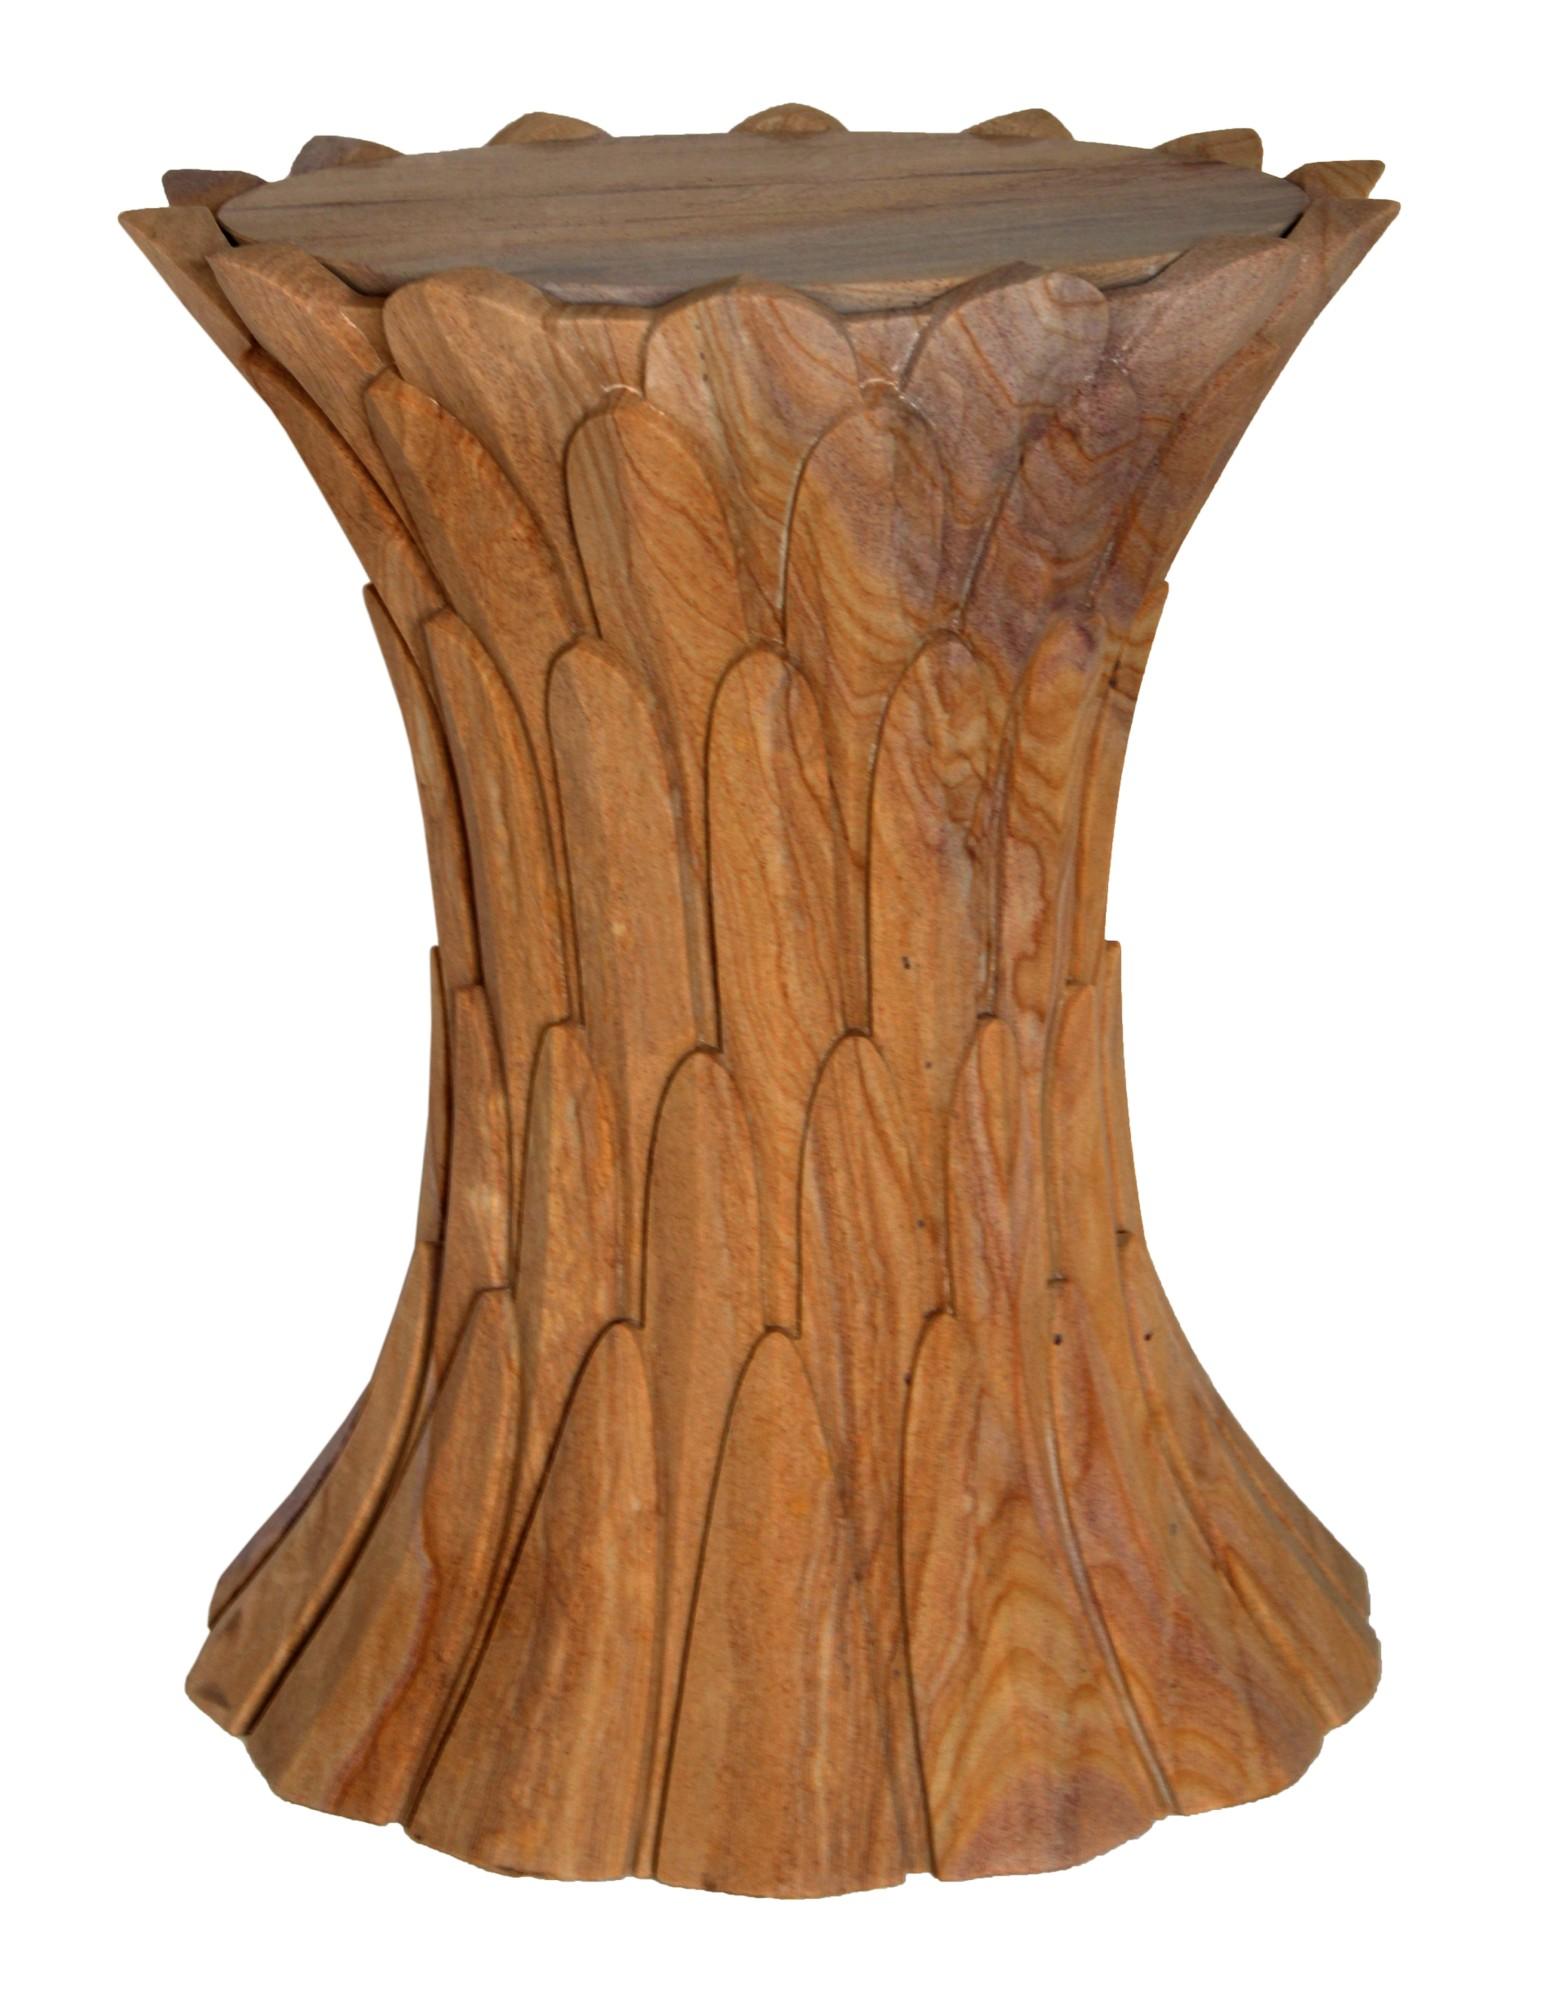 Inspired by the temple carvings in and around Udaipur, Stephanie Odegard designed this unique side table using locally available stones. The arrangement of the carved leaf motif is toned down to give a much lighter feel and appearance. 
 
Feathers